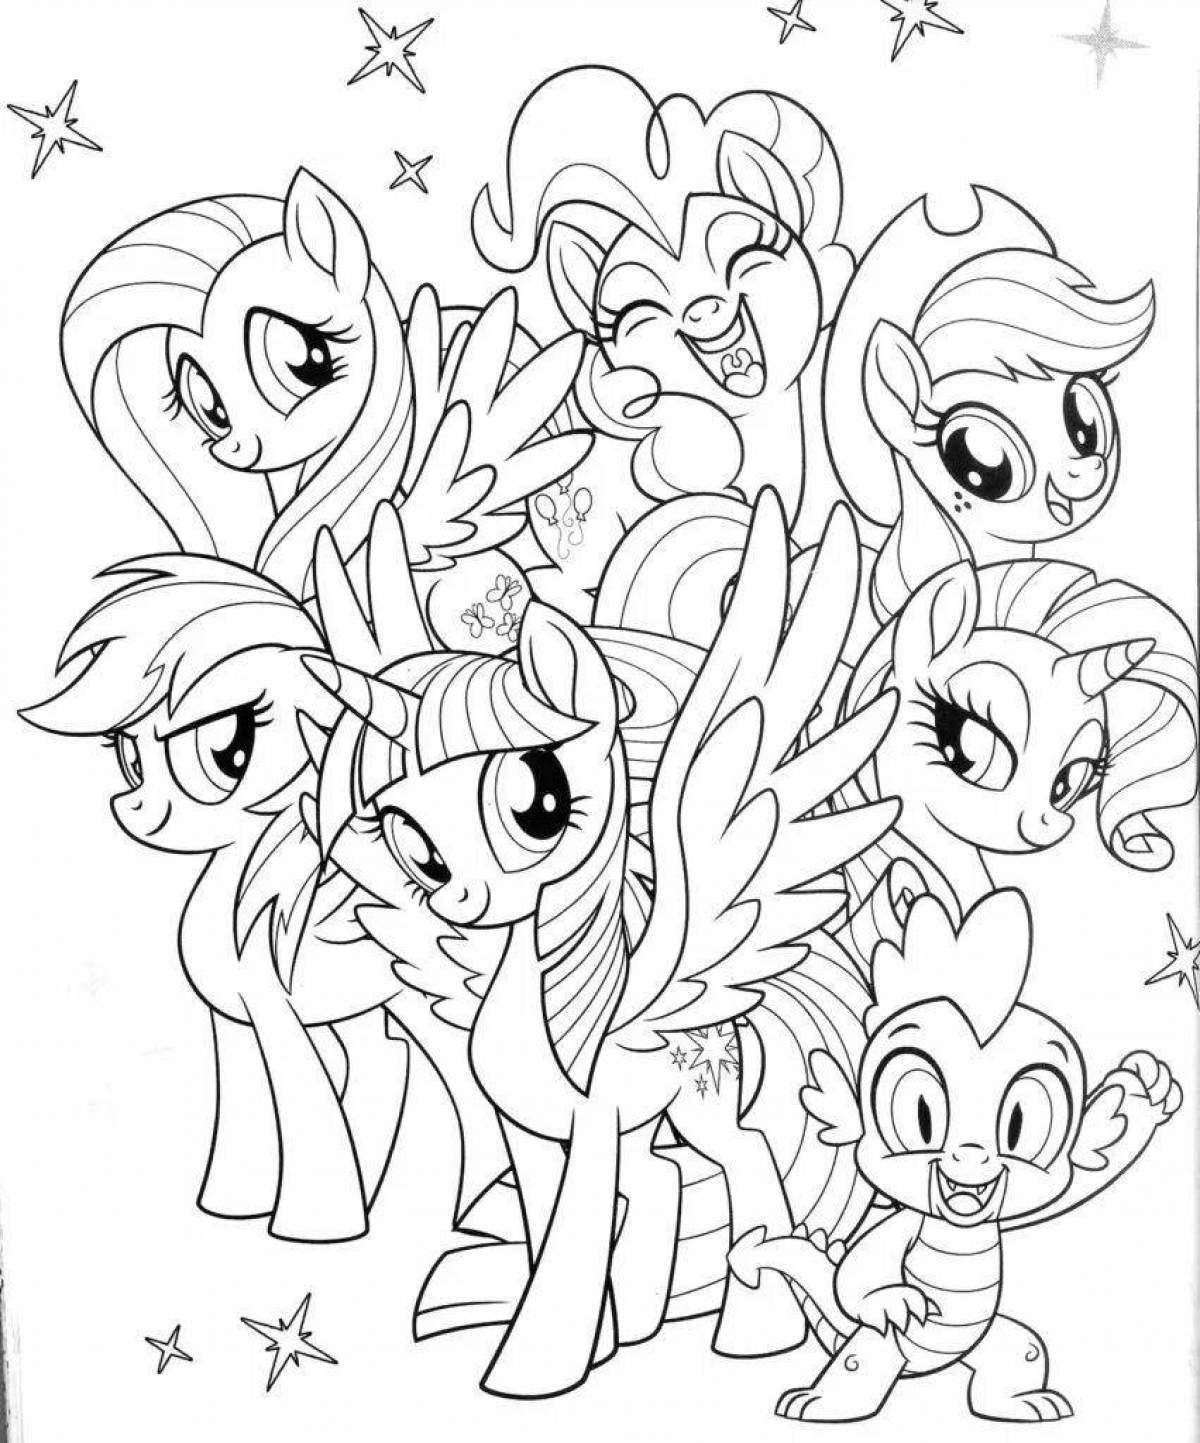 My little pony next generation shining coloring book